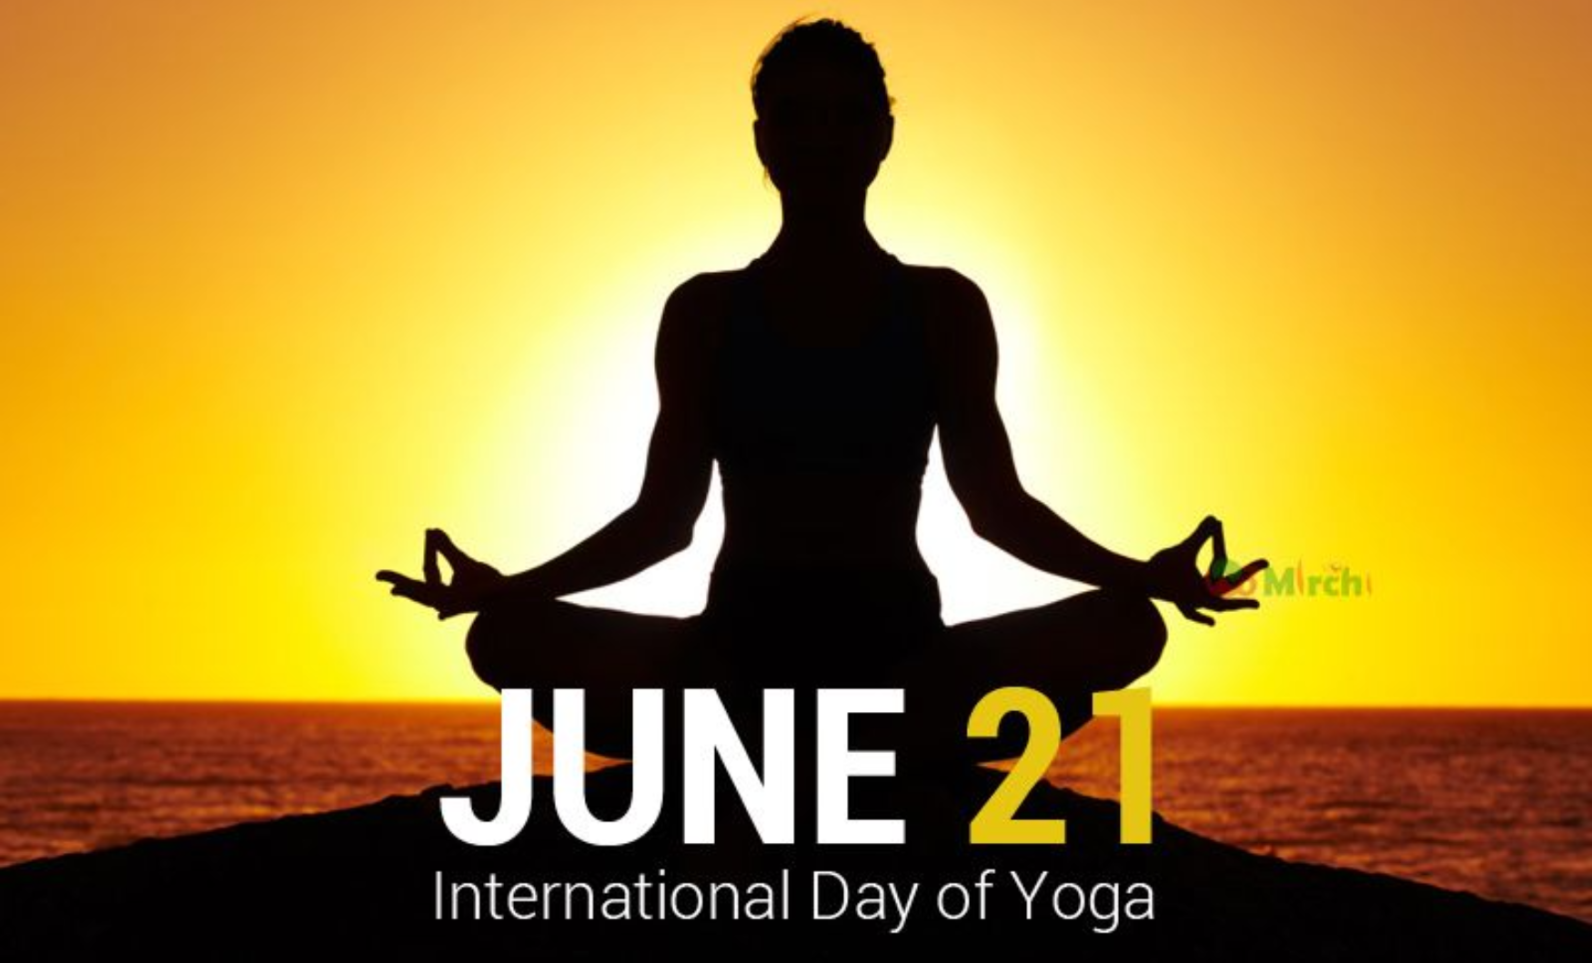 30 Best Yoga Day Poster In The World – Don’t Hestitate For Saving These Free And HD Images